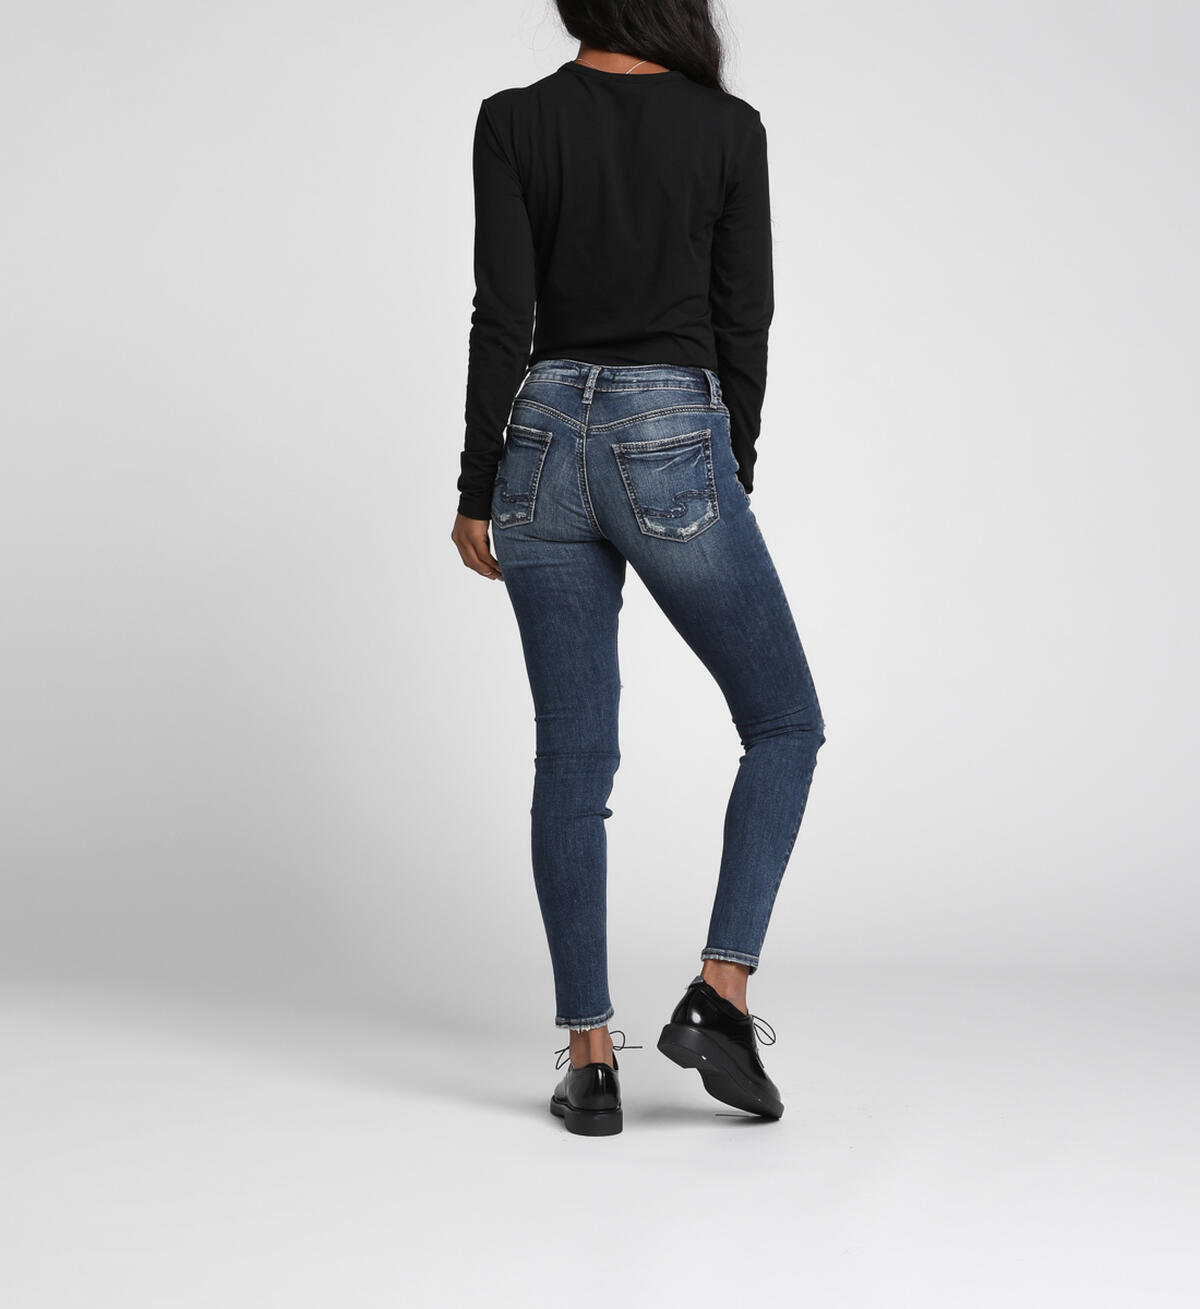 Avery High Rise Skinny Leg Jeans Final Sale, , hi-res image number 1